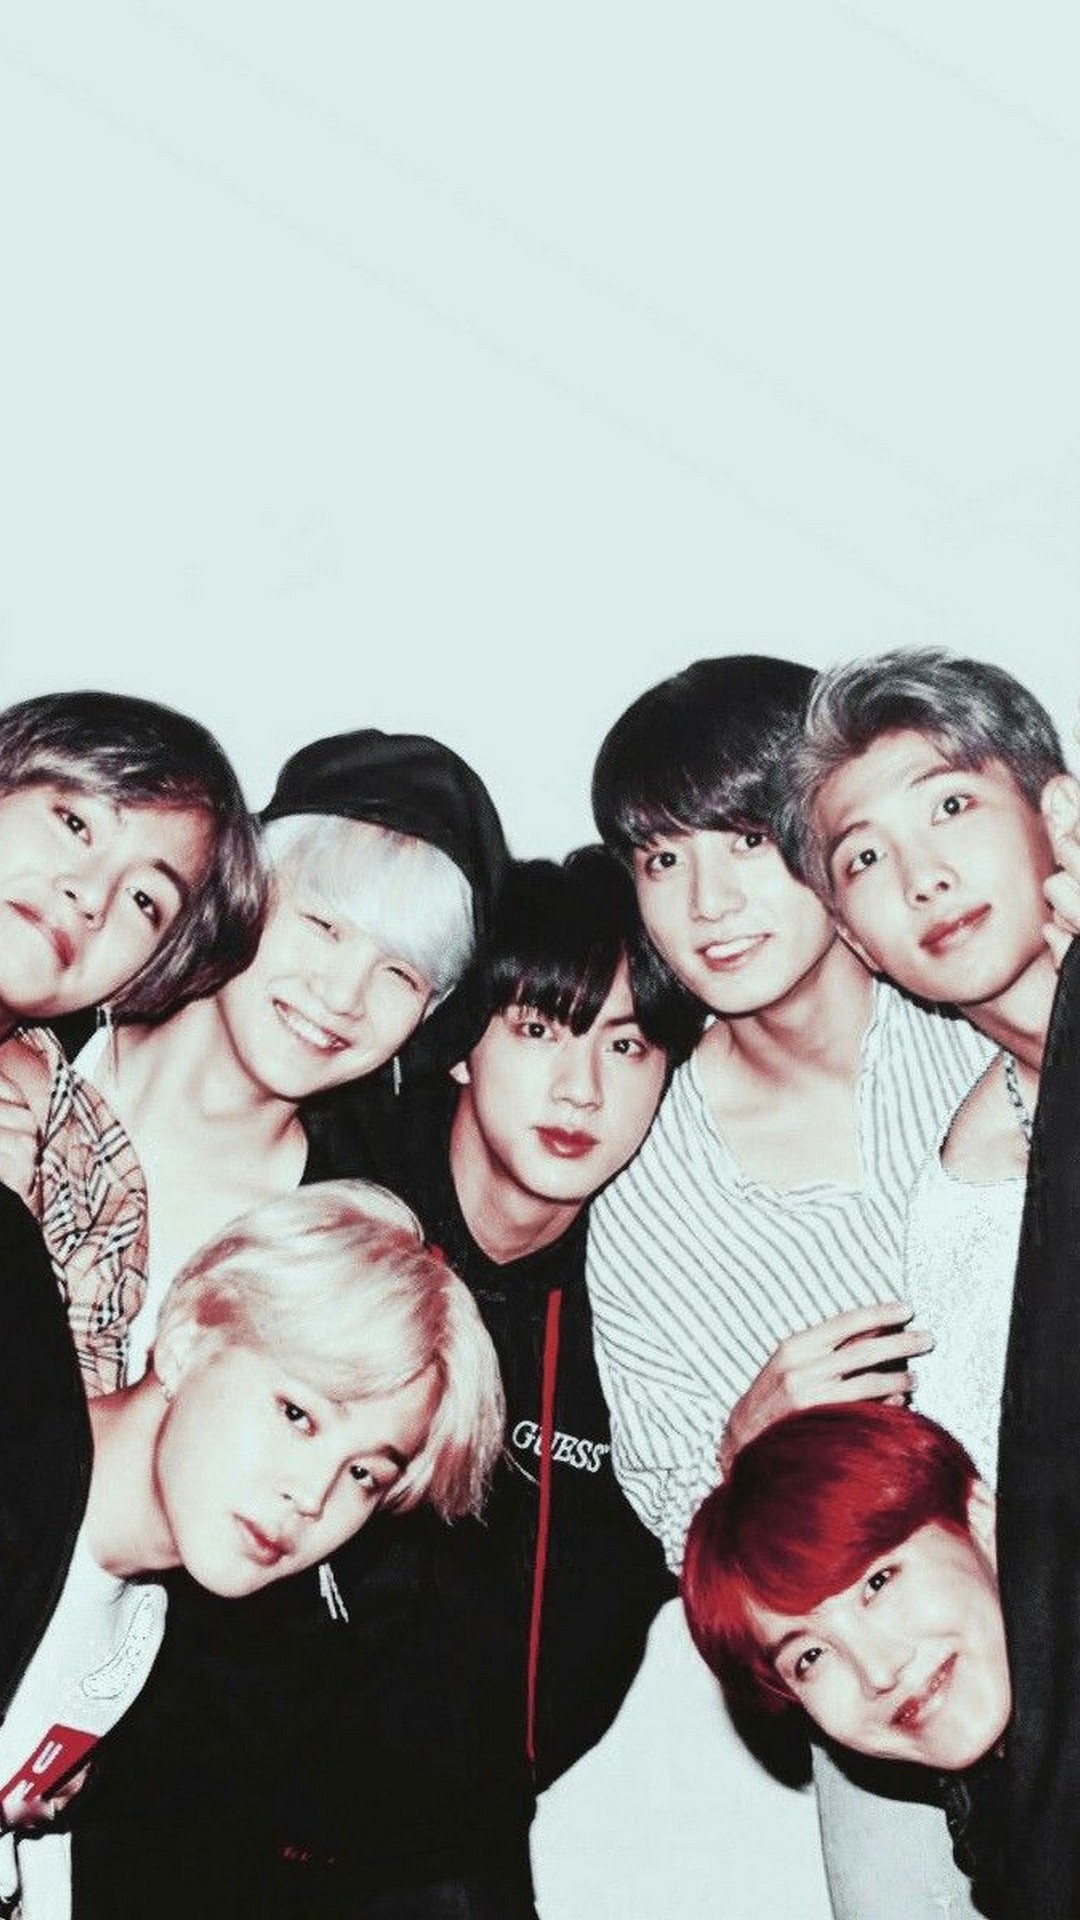 Bts Wallpaper For Android